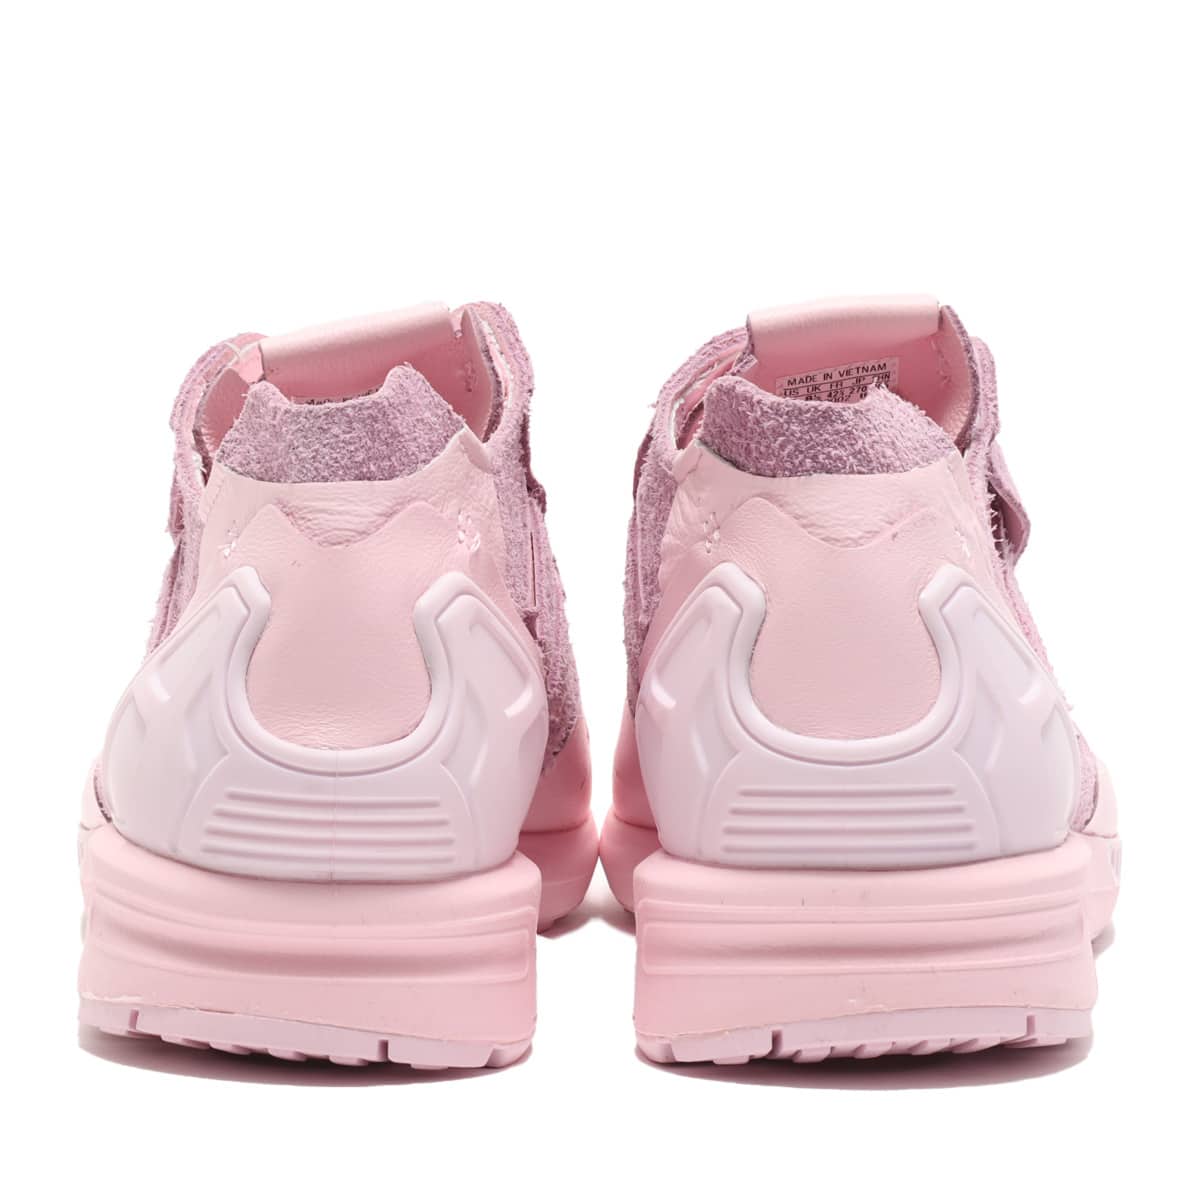 adidas ZX 8000 MINIMALIST ICONS CLEAR PINK/CLEAR PINK/CLEAR PINK 